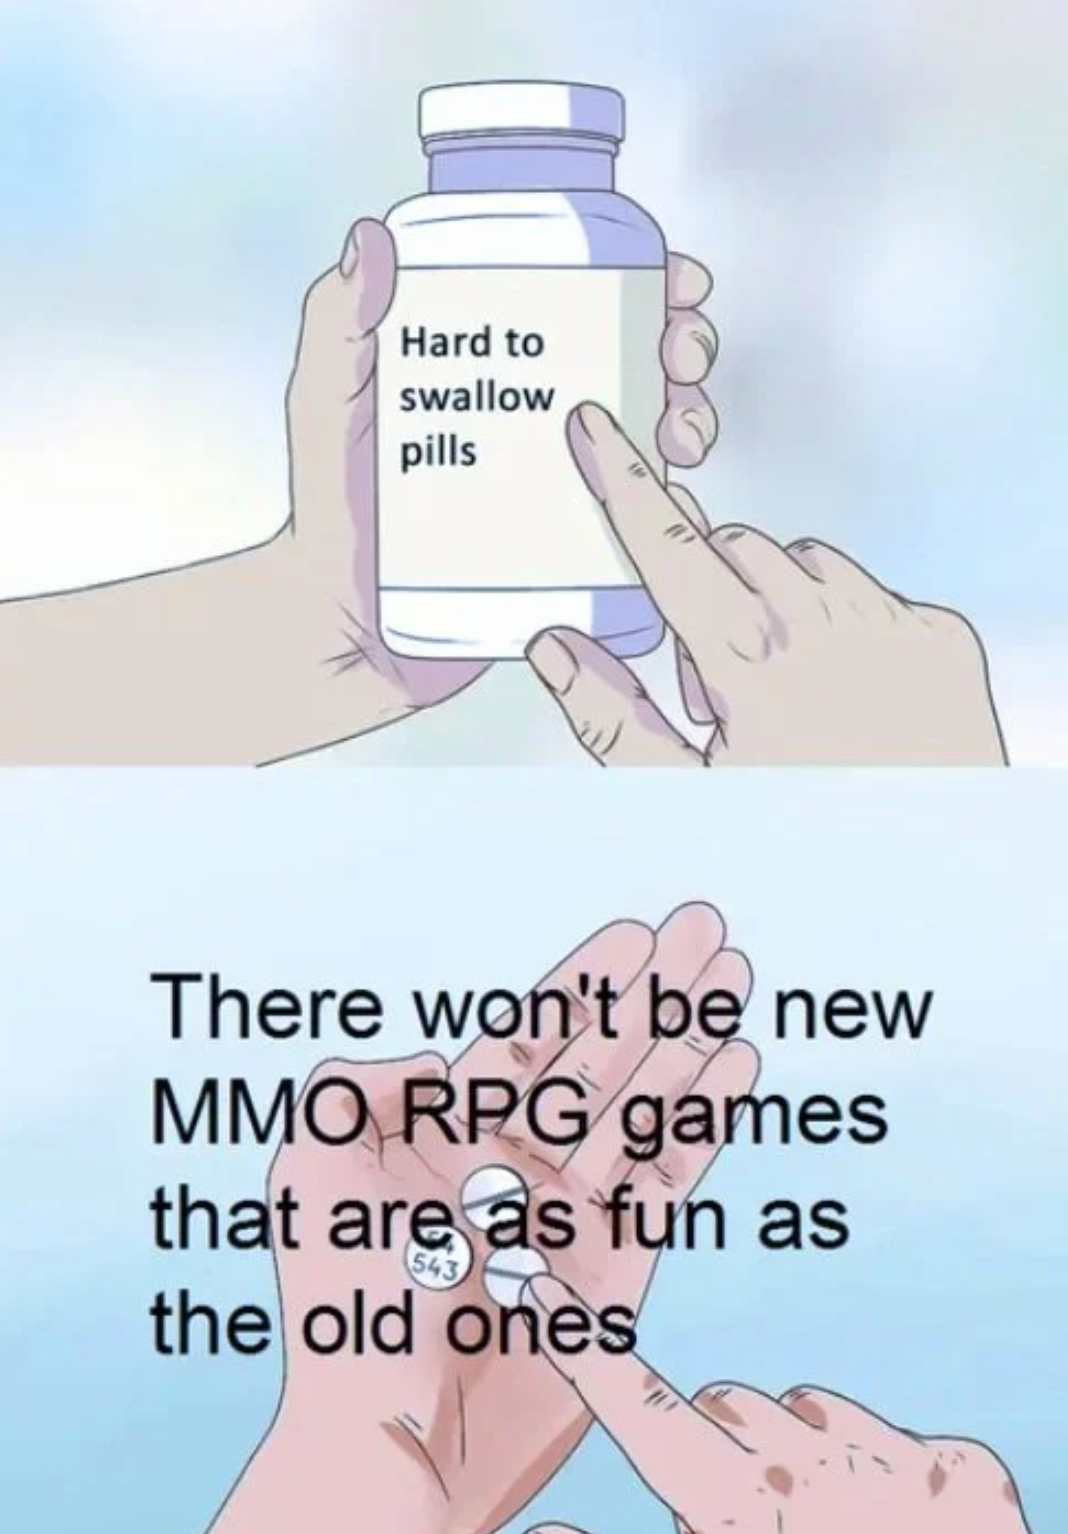 funny gaming memes  - hard to swallow pills meme depression - Hard to swallow pills There won't be new Mmo Rpg games that are as fun as the old ones